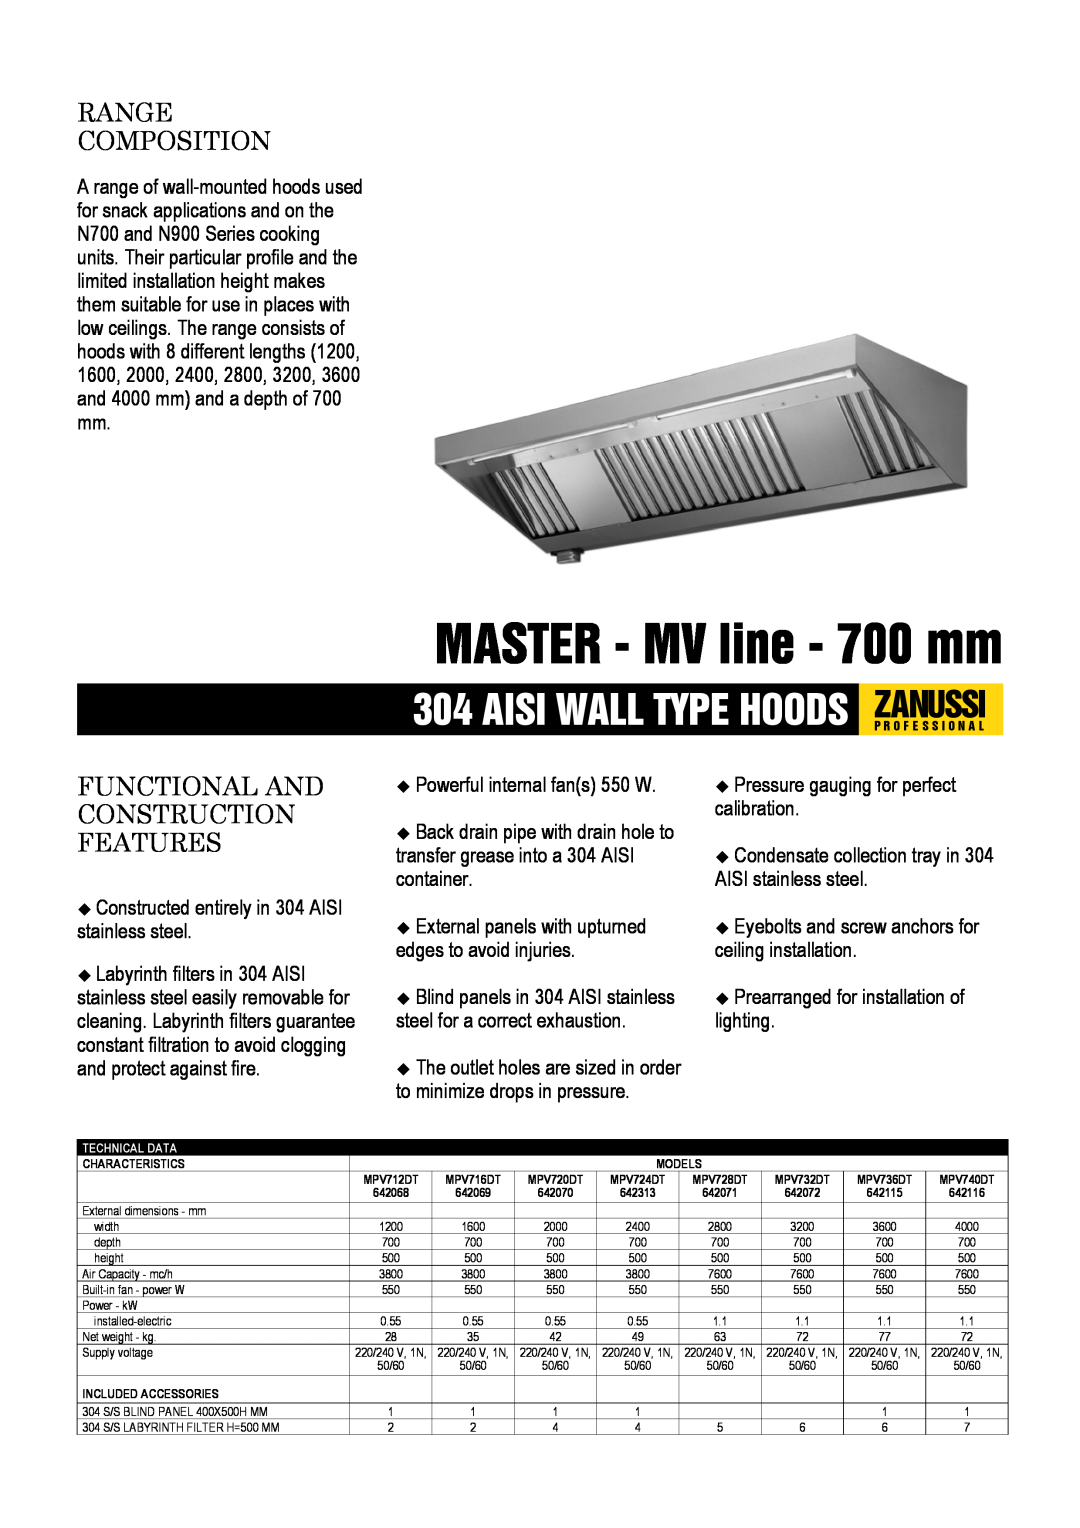 Zanussi 642116, 642313 dimensions MASTER - MV line - 700 mm, Range Composition, Functional And Construction Features 